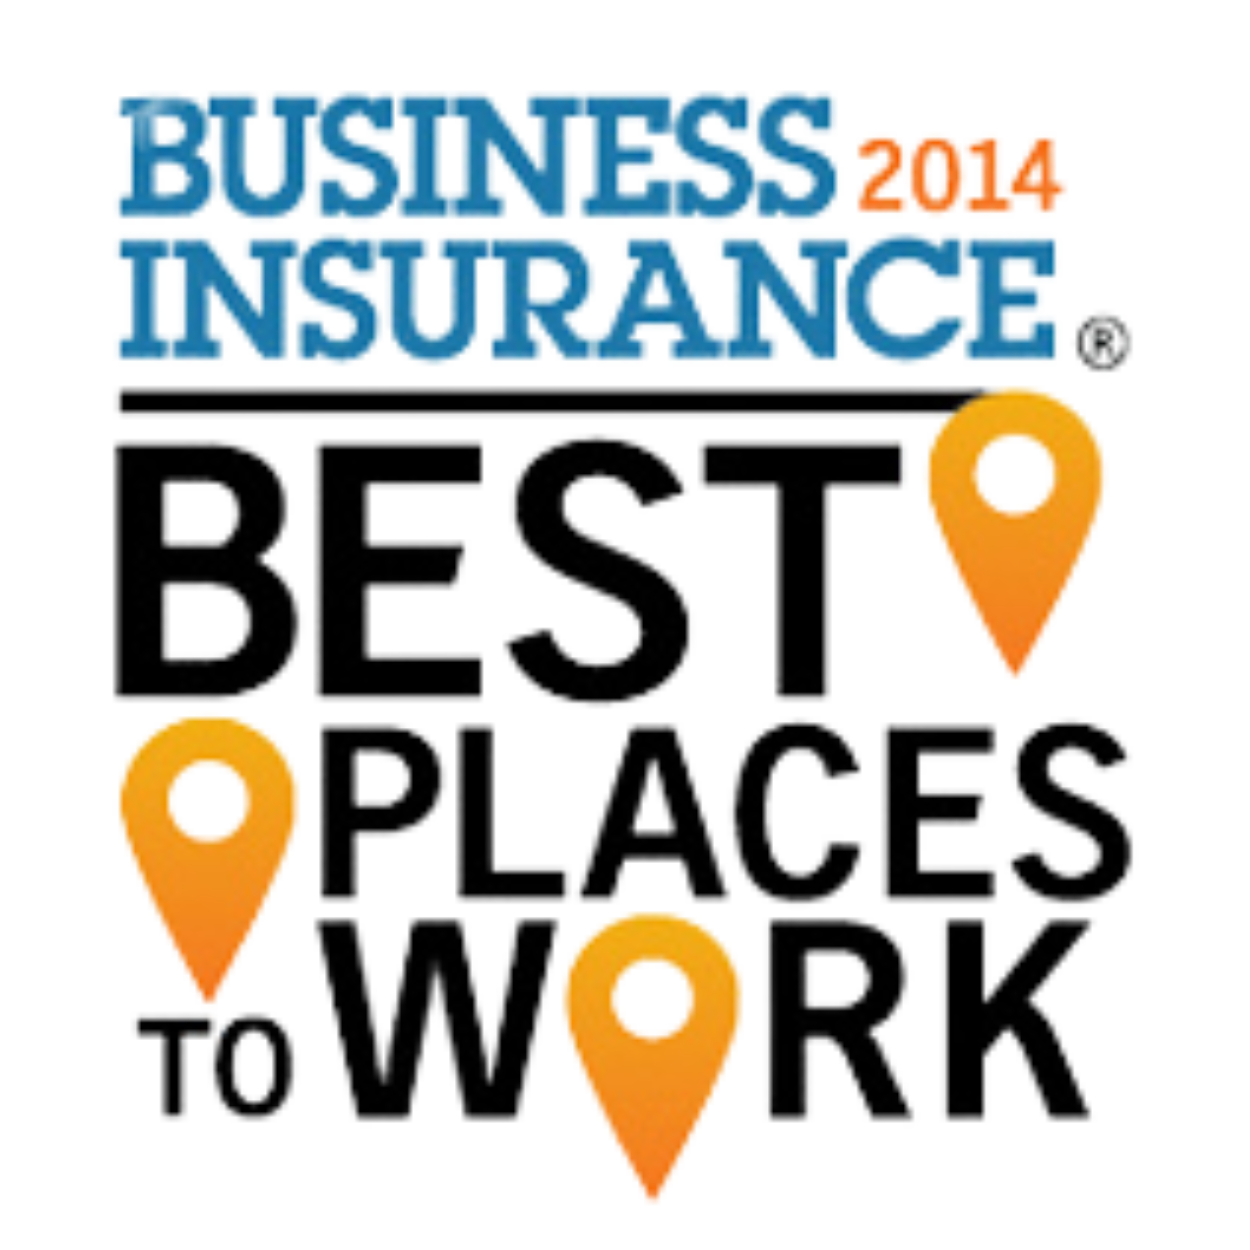 2014 best places to work